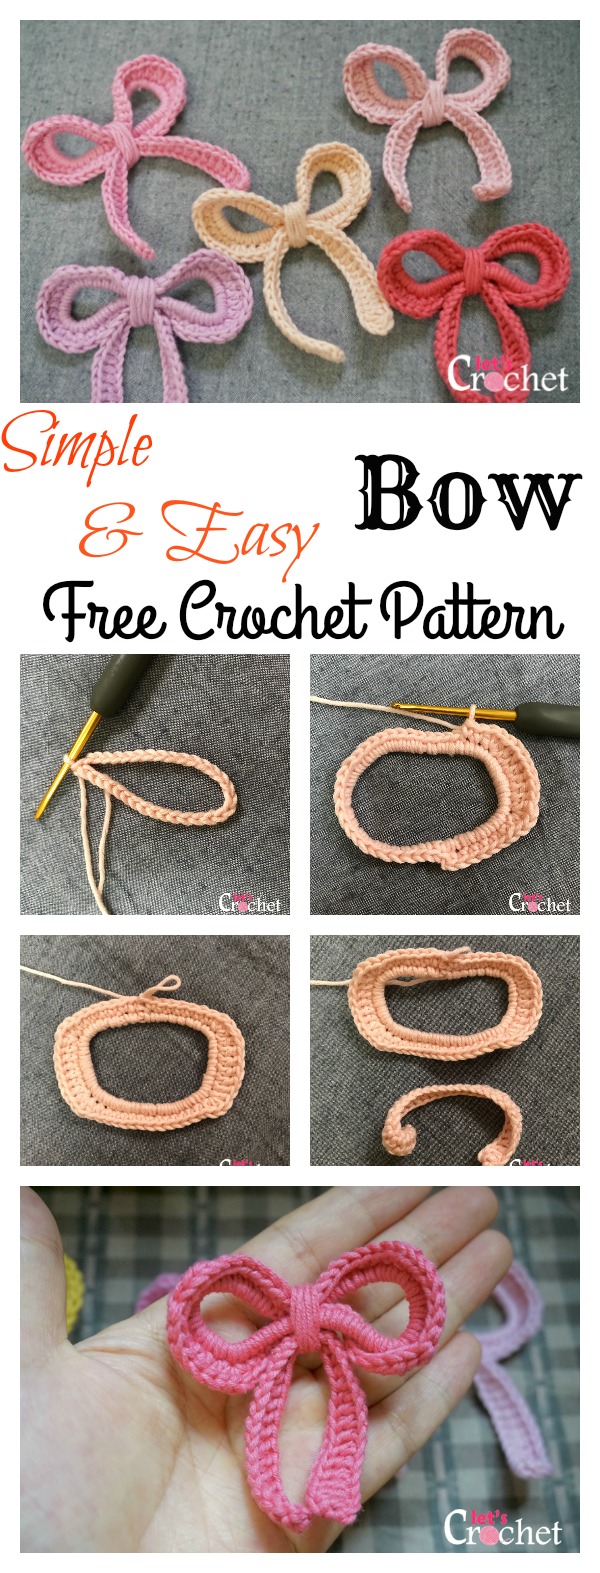 Simple and Easy Bow Free Crochet Pattern